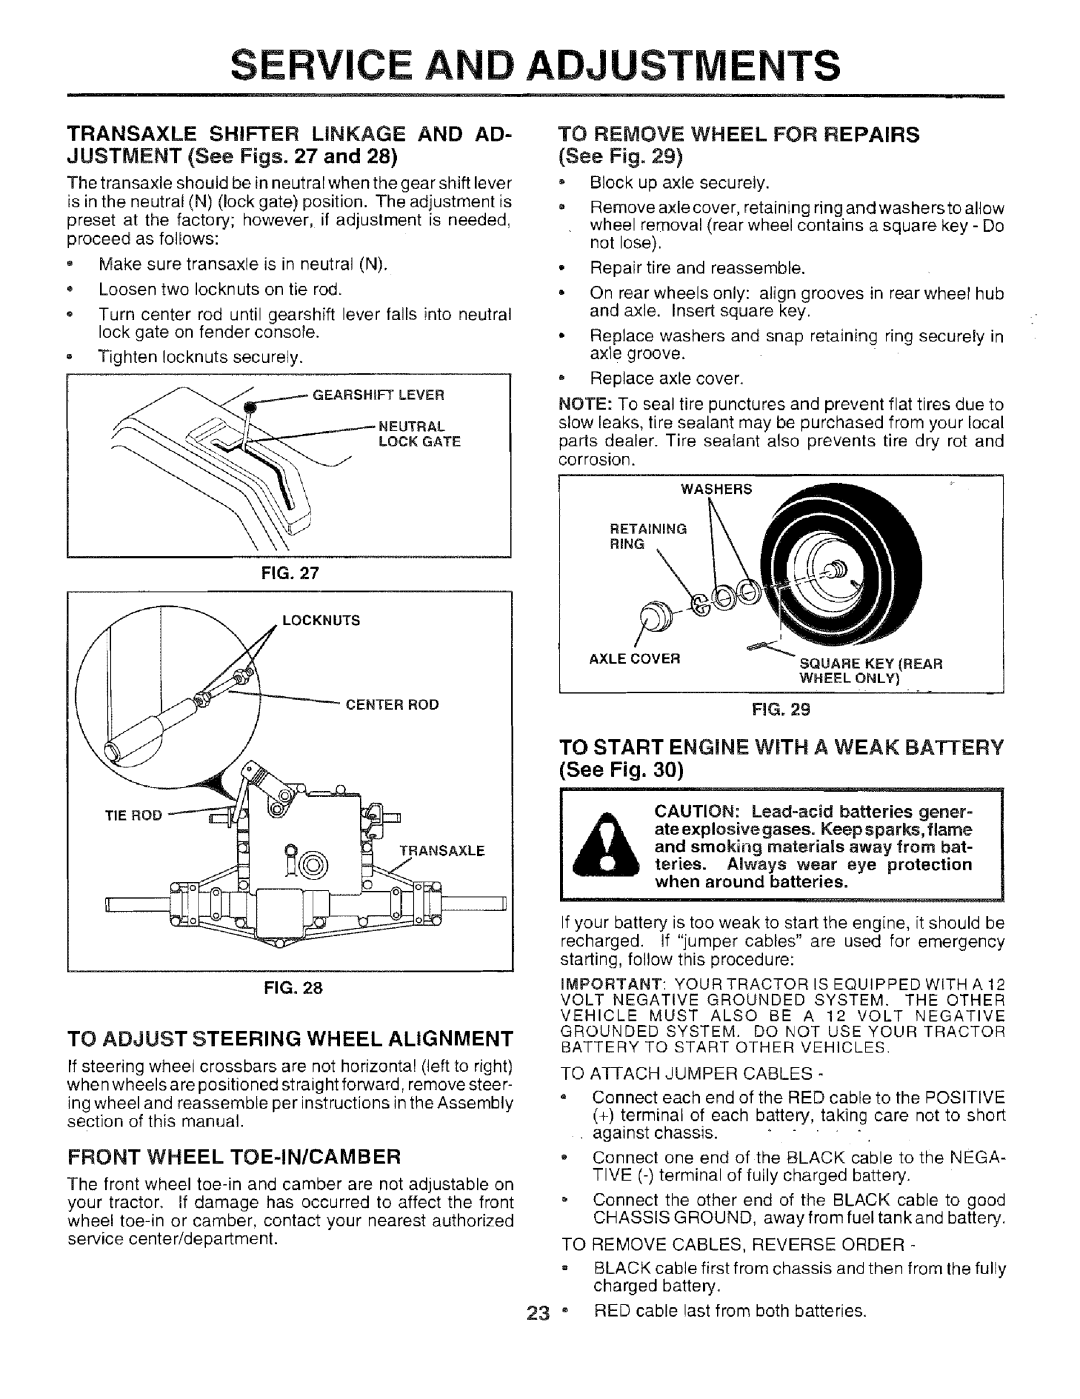 Sears 917.259567 Service And, Adj Stments, TO REMOVE WHEEL FOR REPAIRS See Fig, To Adjust Steering Wheel Alignment 